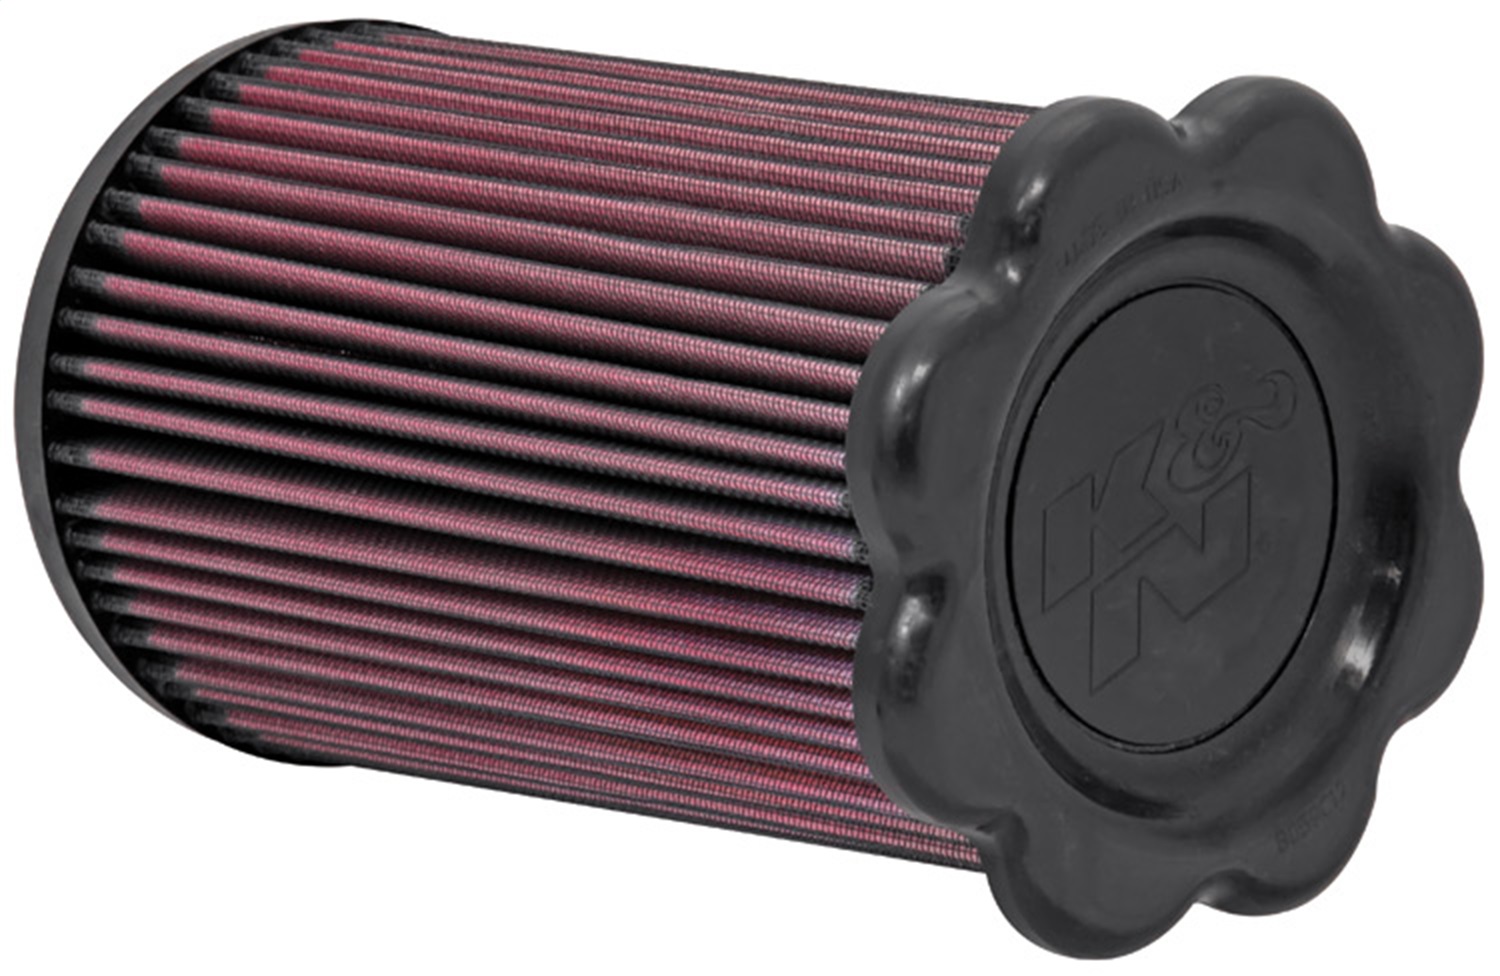 K&N Filters K&N Filters E-1990 Air Filter Fits 09-12 Escape Mariner Tribute